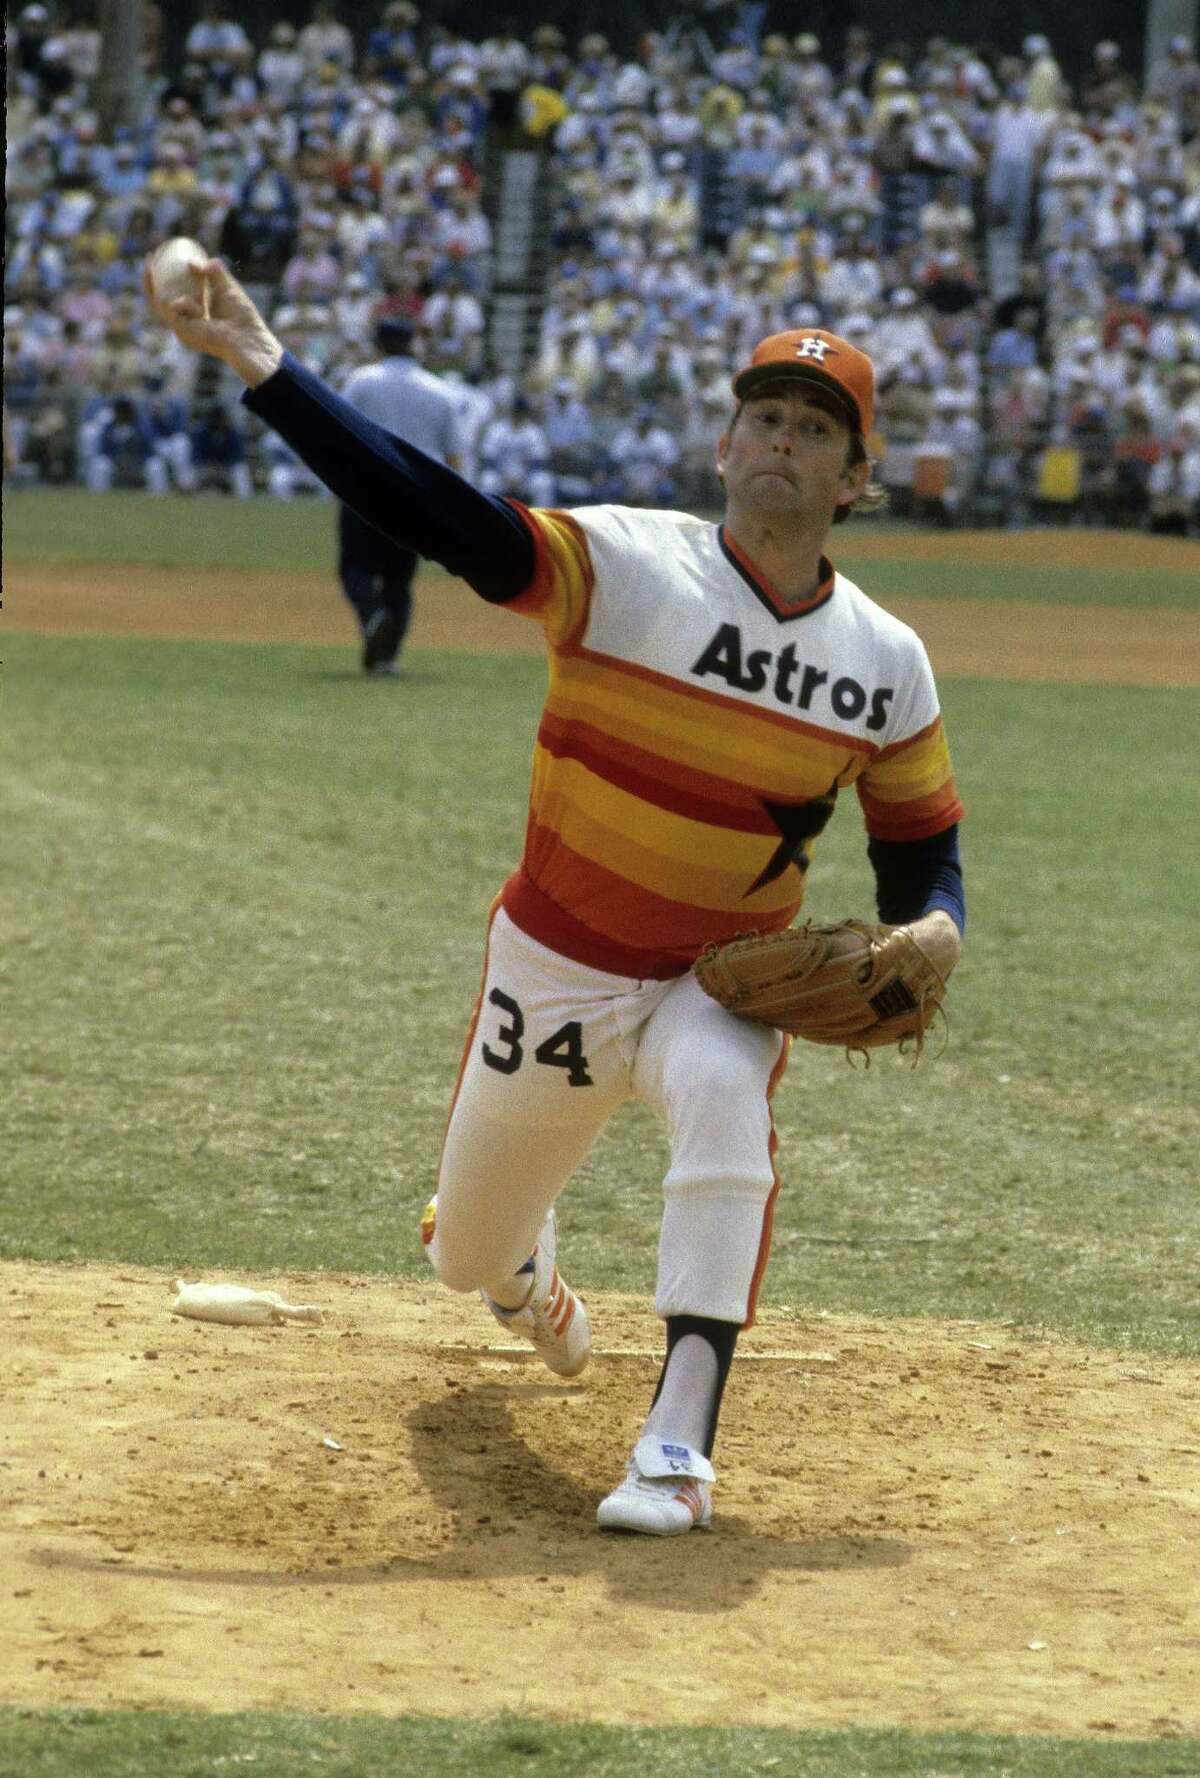 Old Time Family Baseball — The Solution to the Astros Uniform Problems